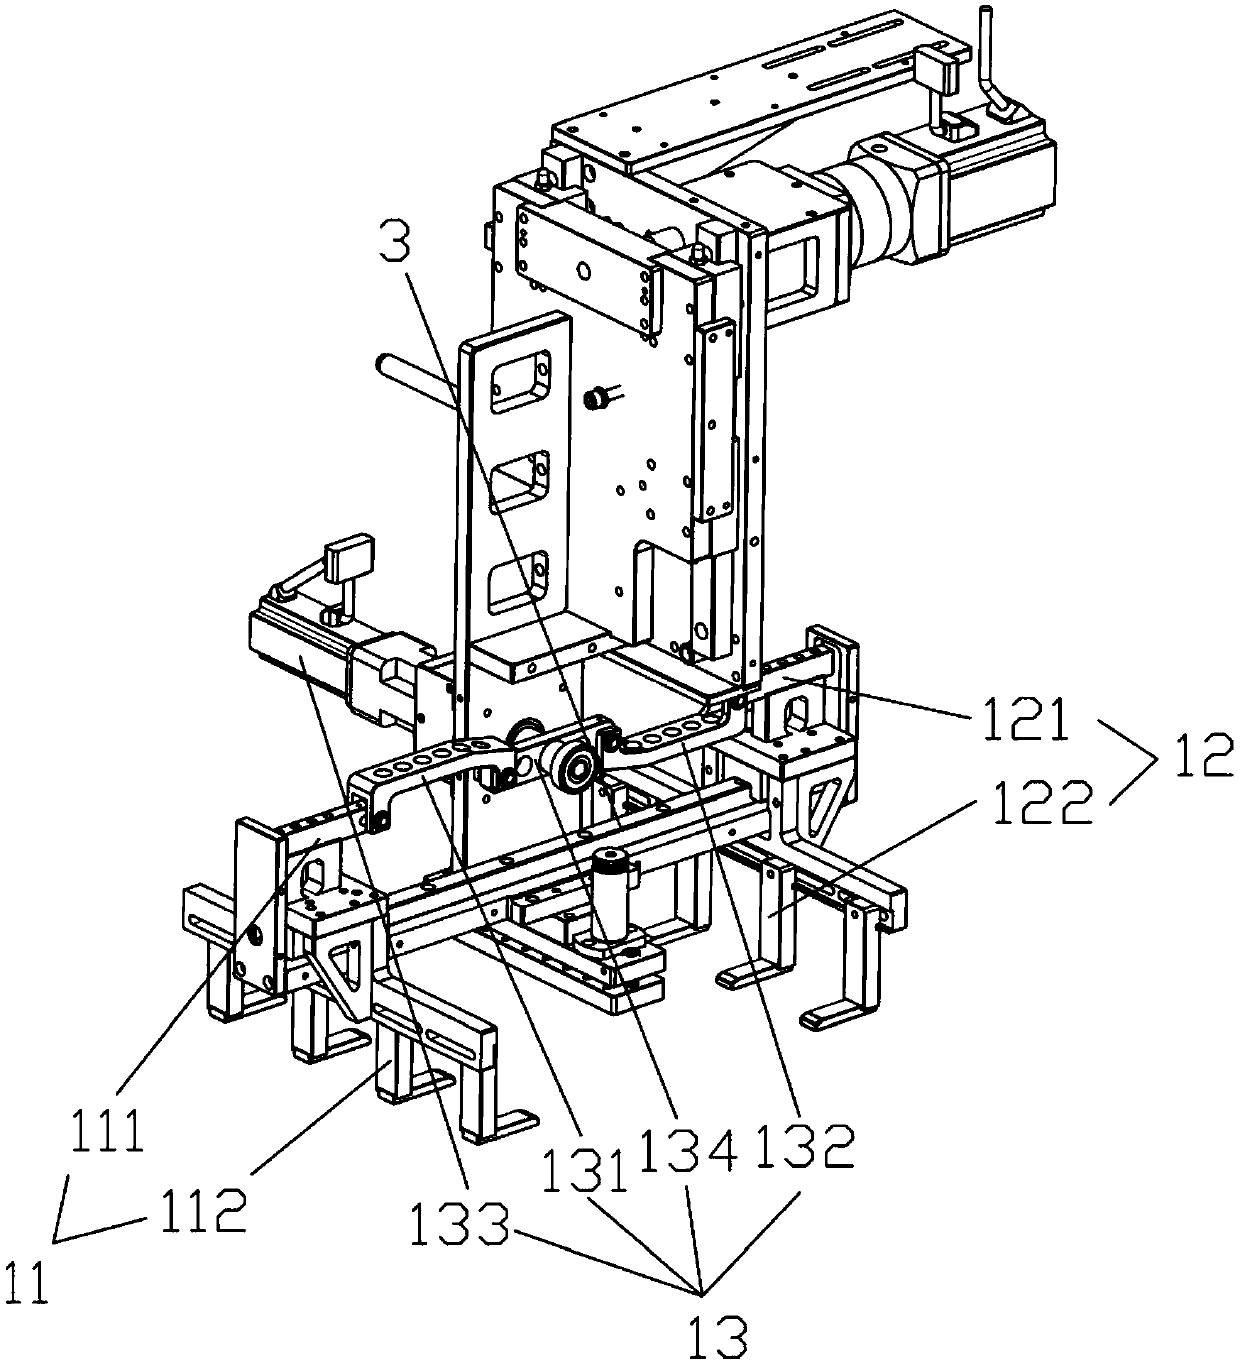 Clamping robot structure